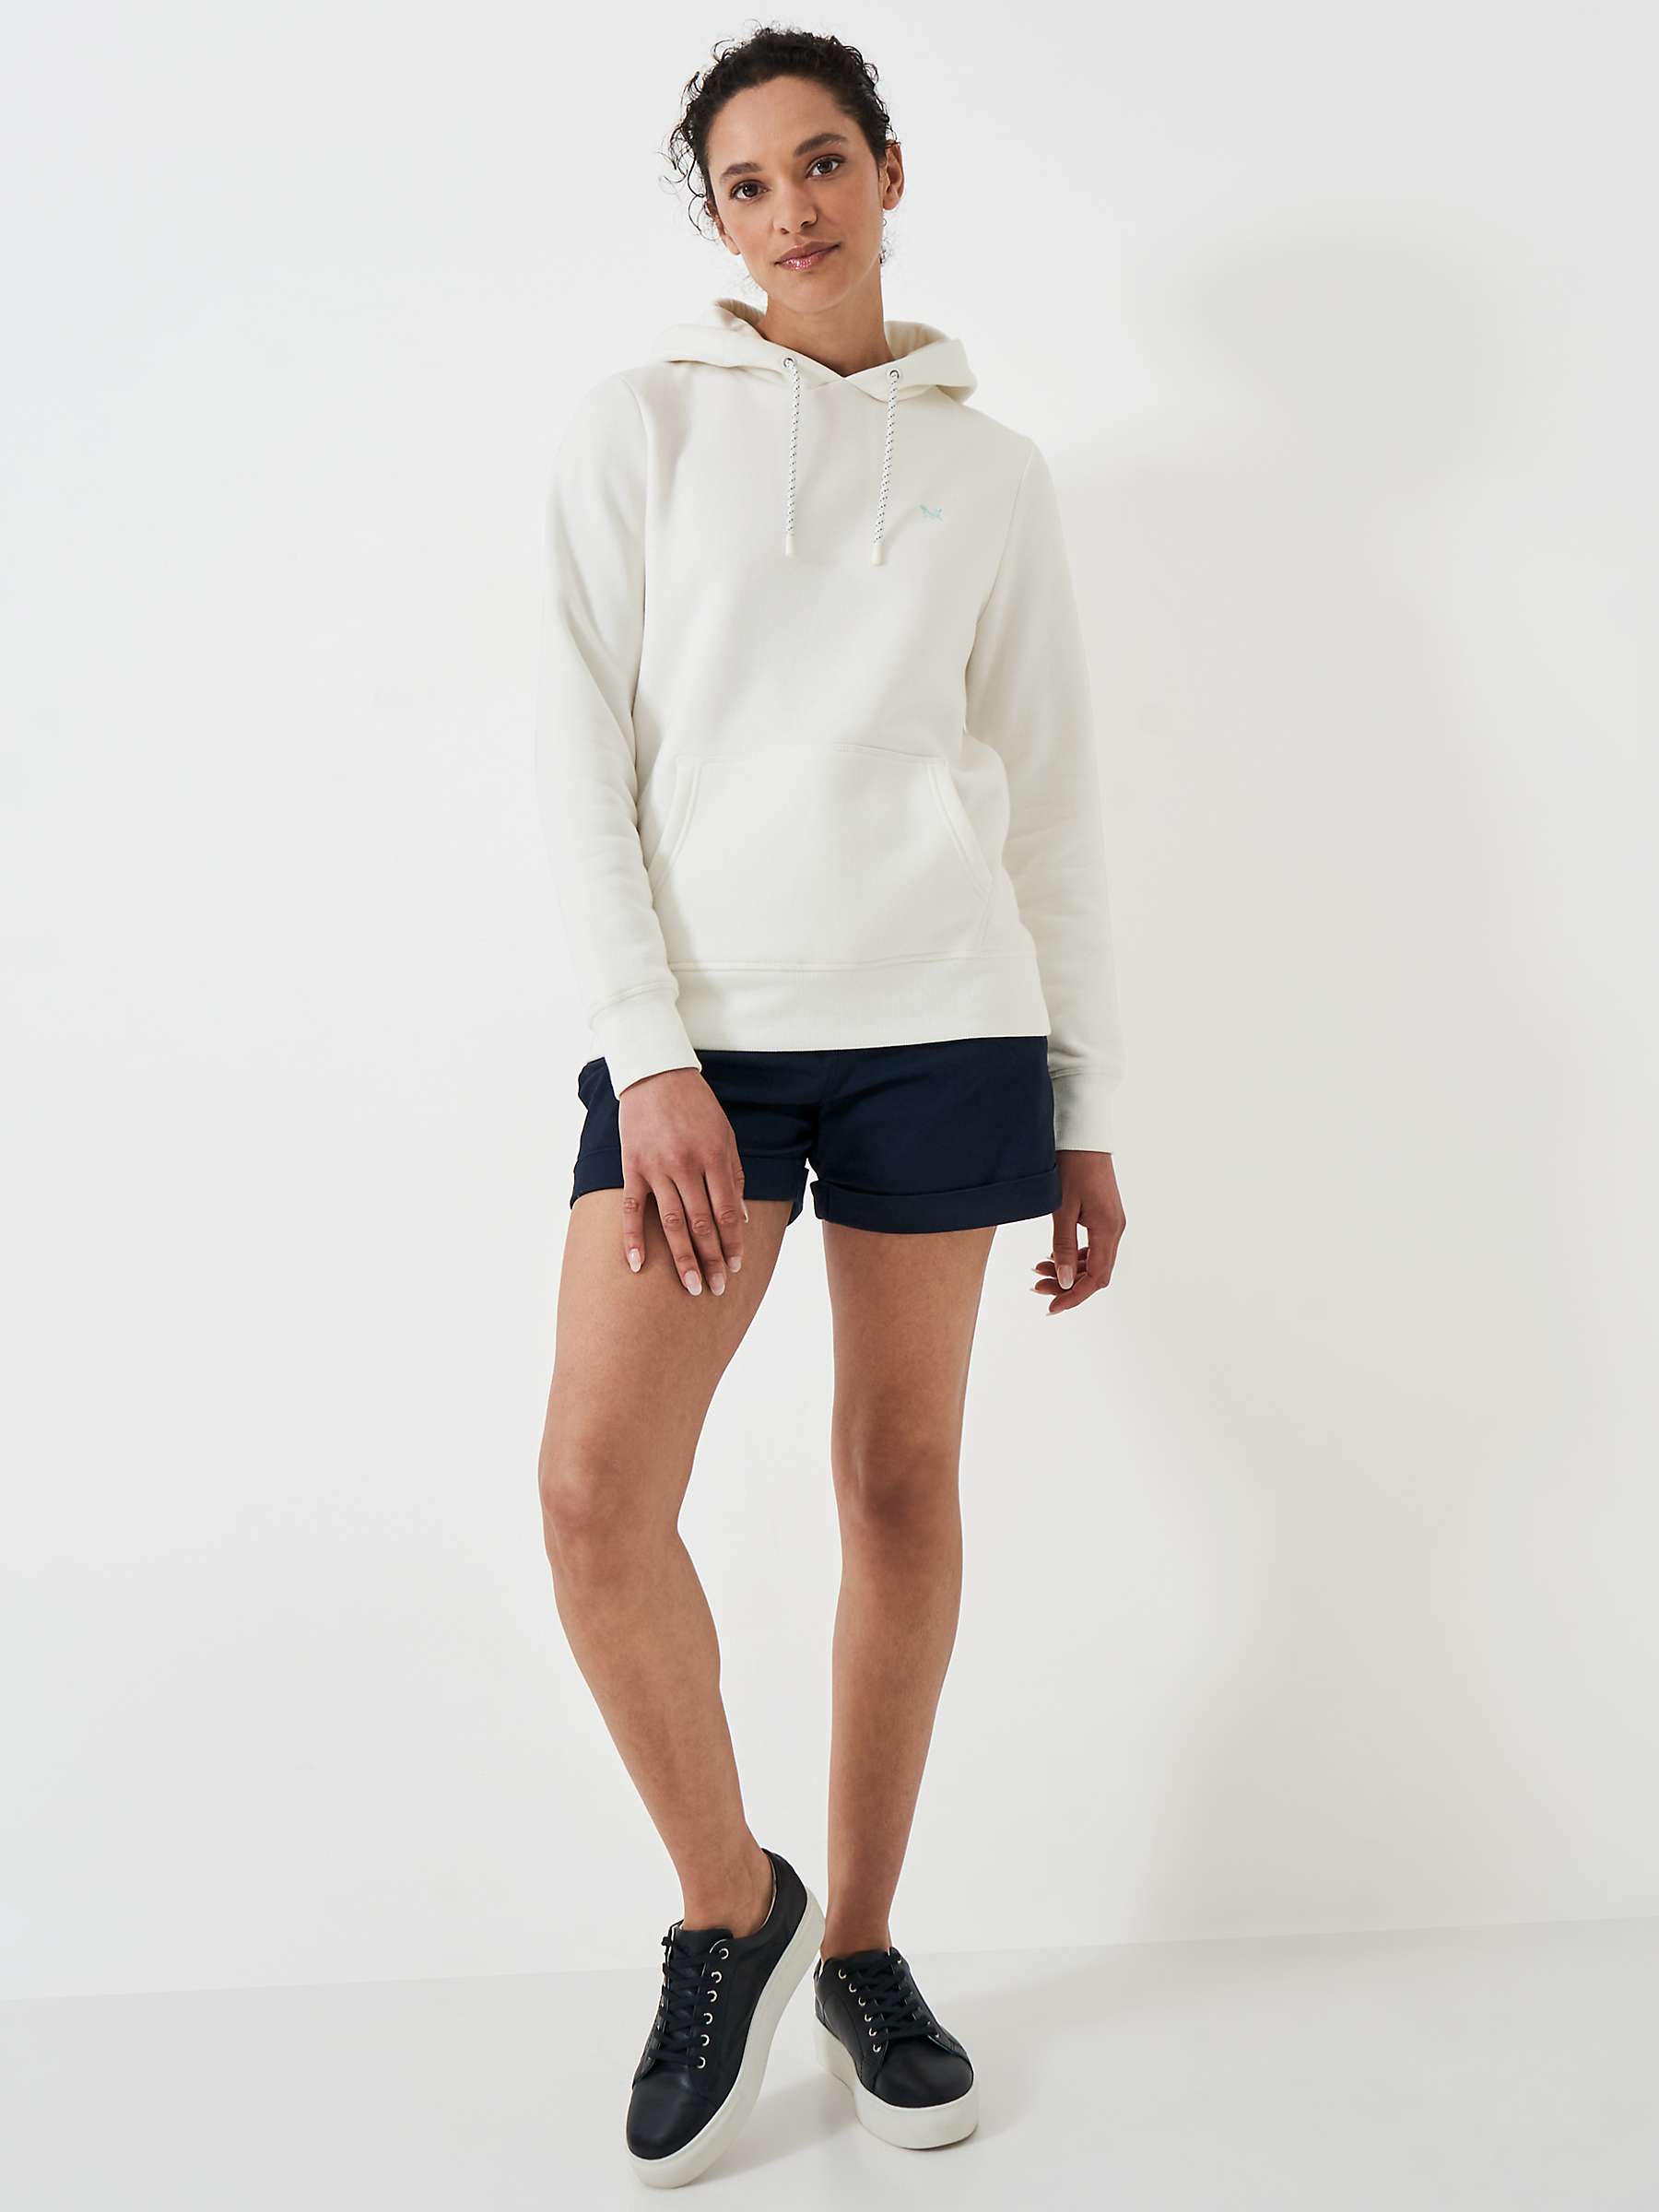 Buy Crew Clothing Cotton Blend Hoodie Online at johnlewis.com